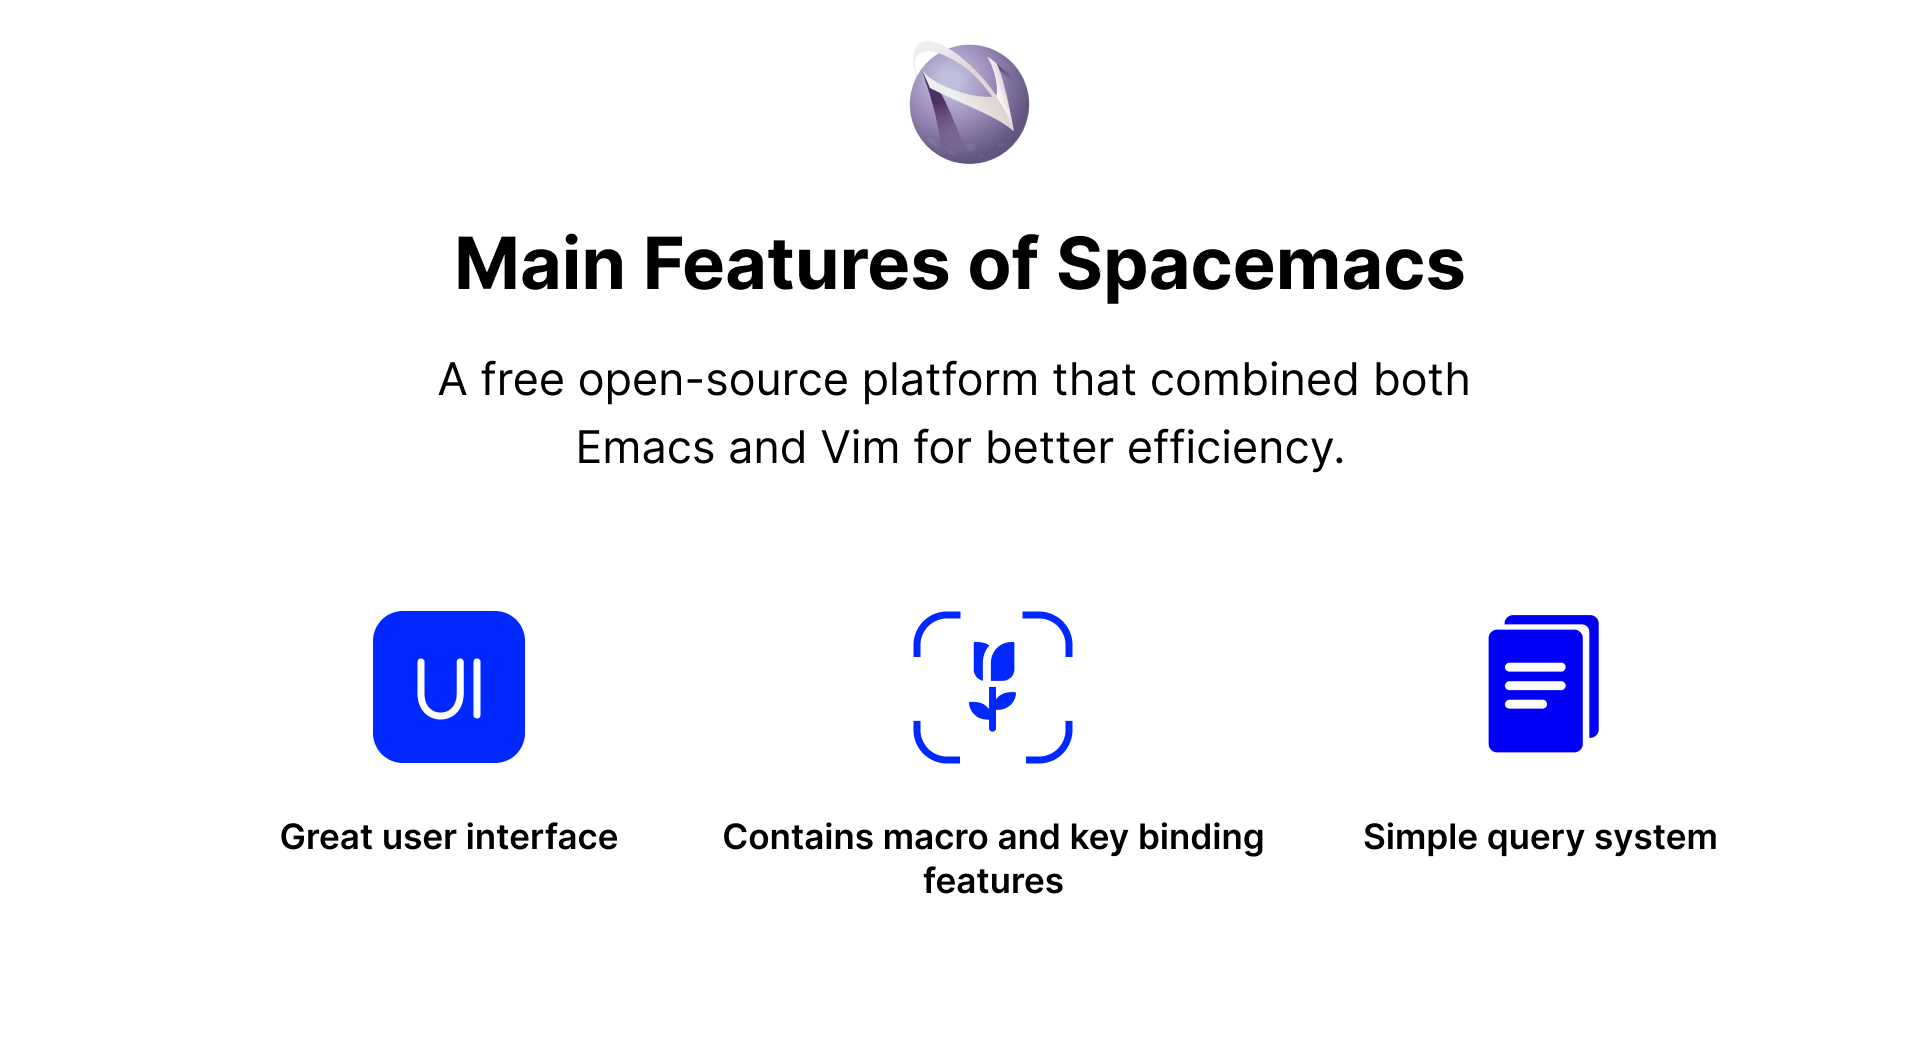 Main Features of Spacemacs